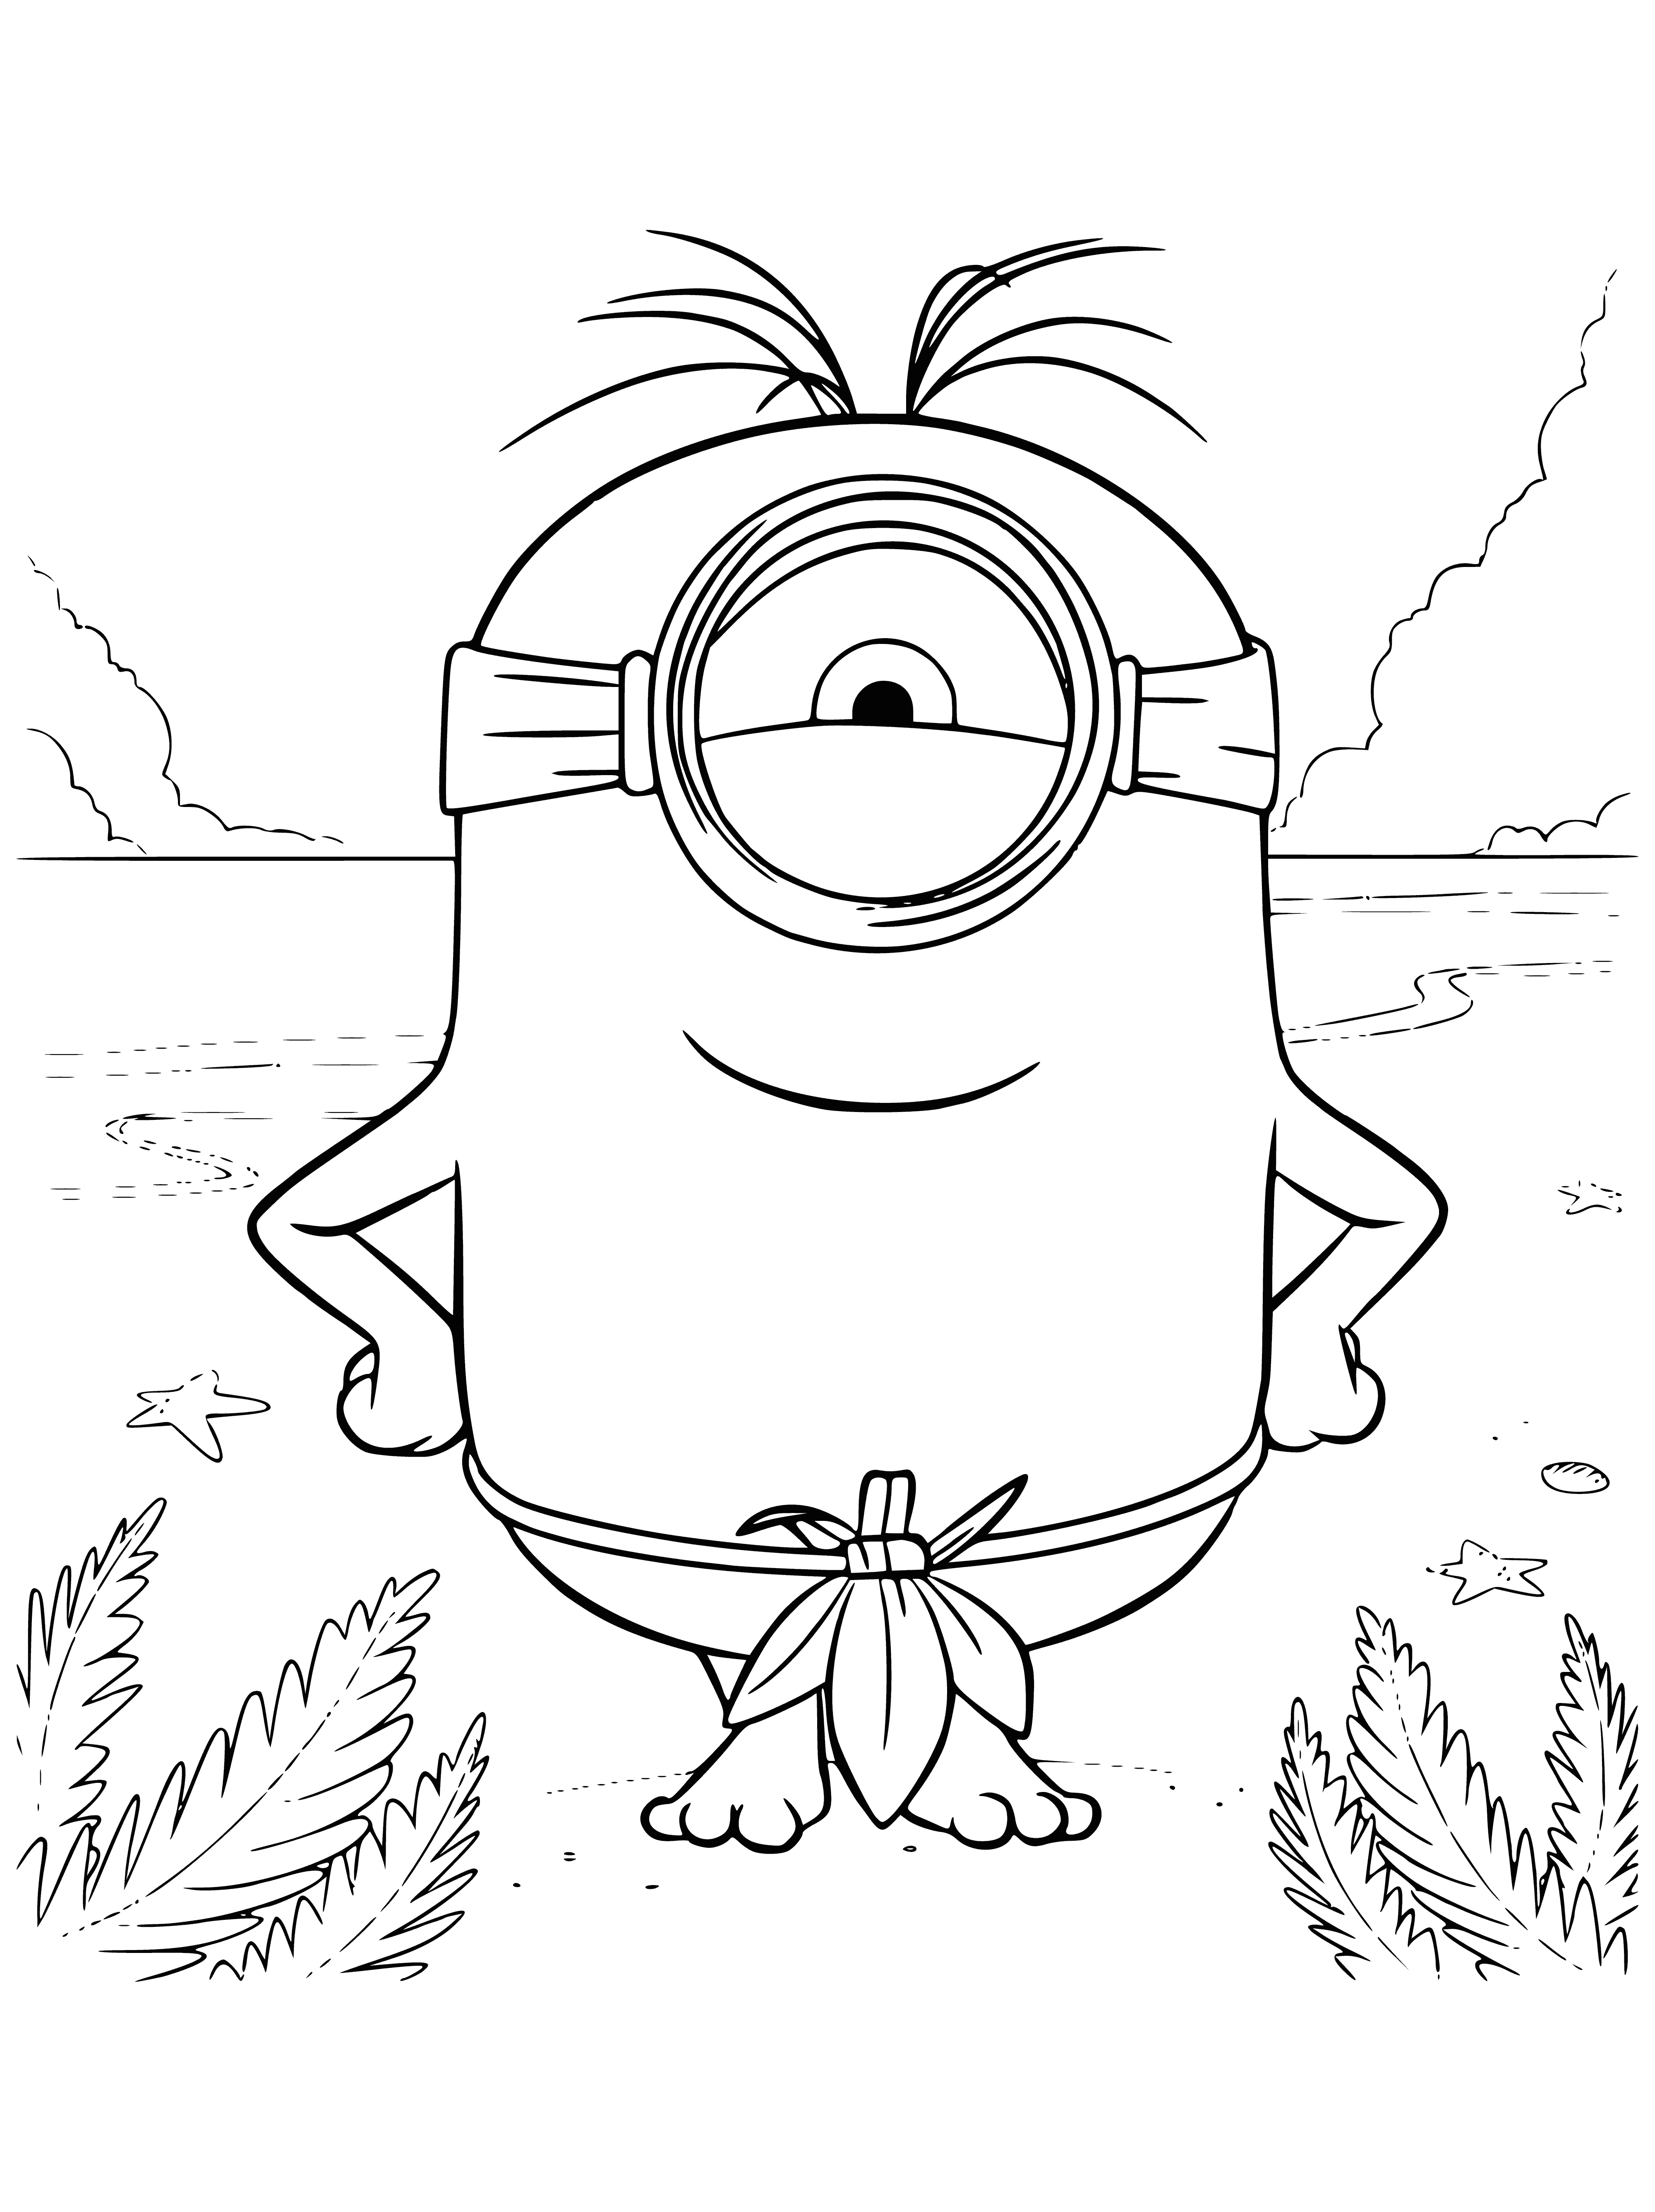 coloring page: Minion is coloring by beach with palm trees & blue water in background; sign reads "Mignon Island".